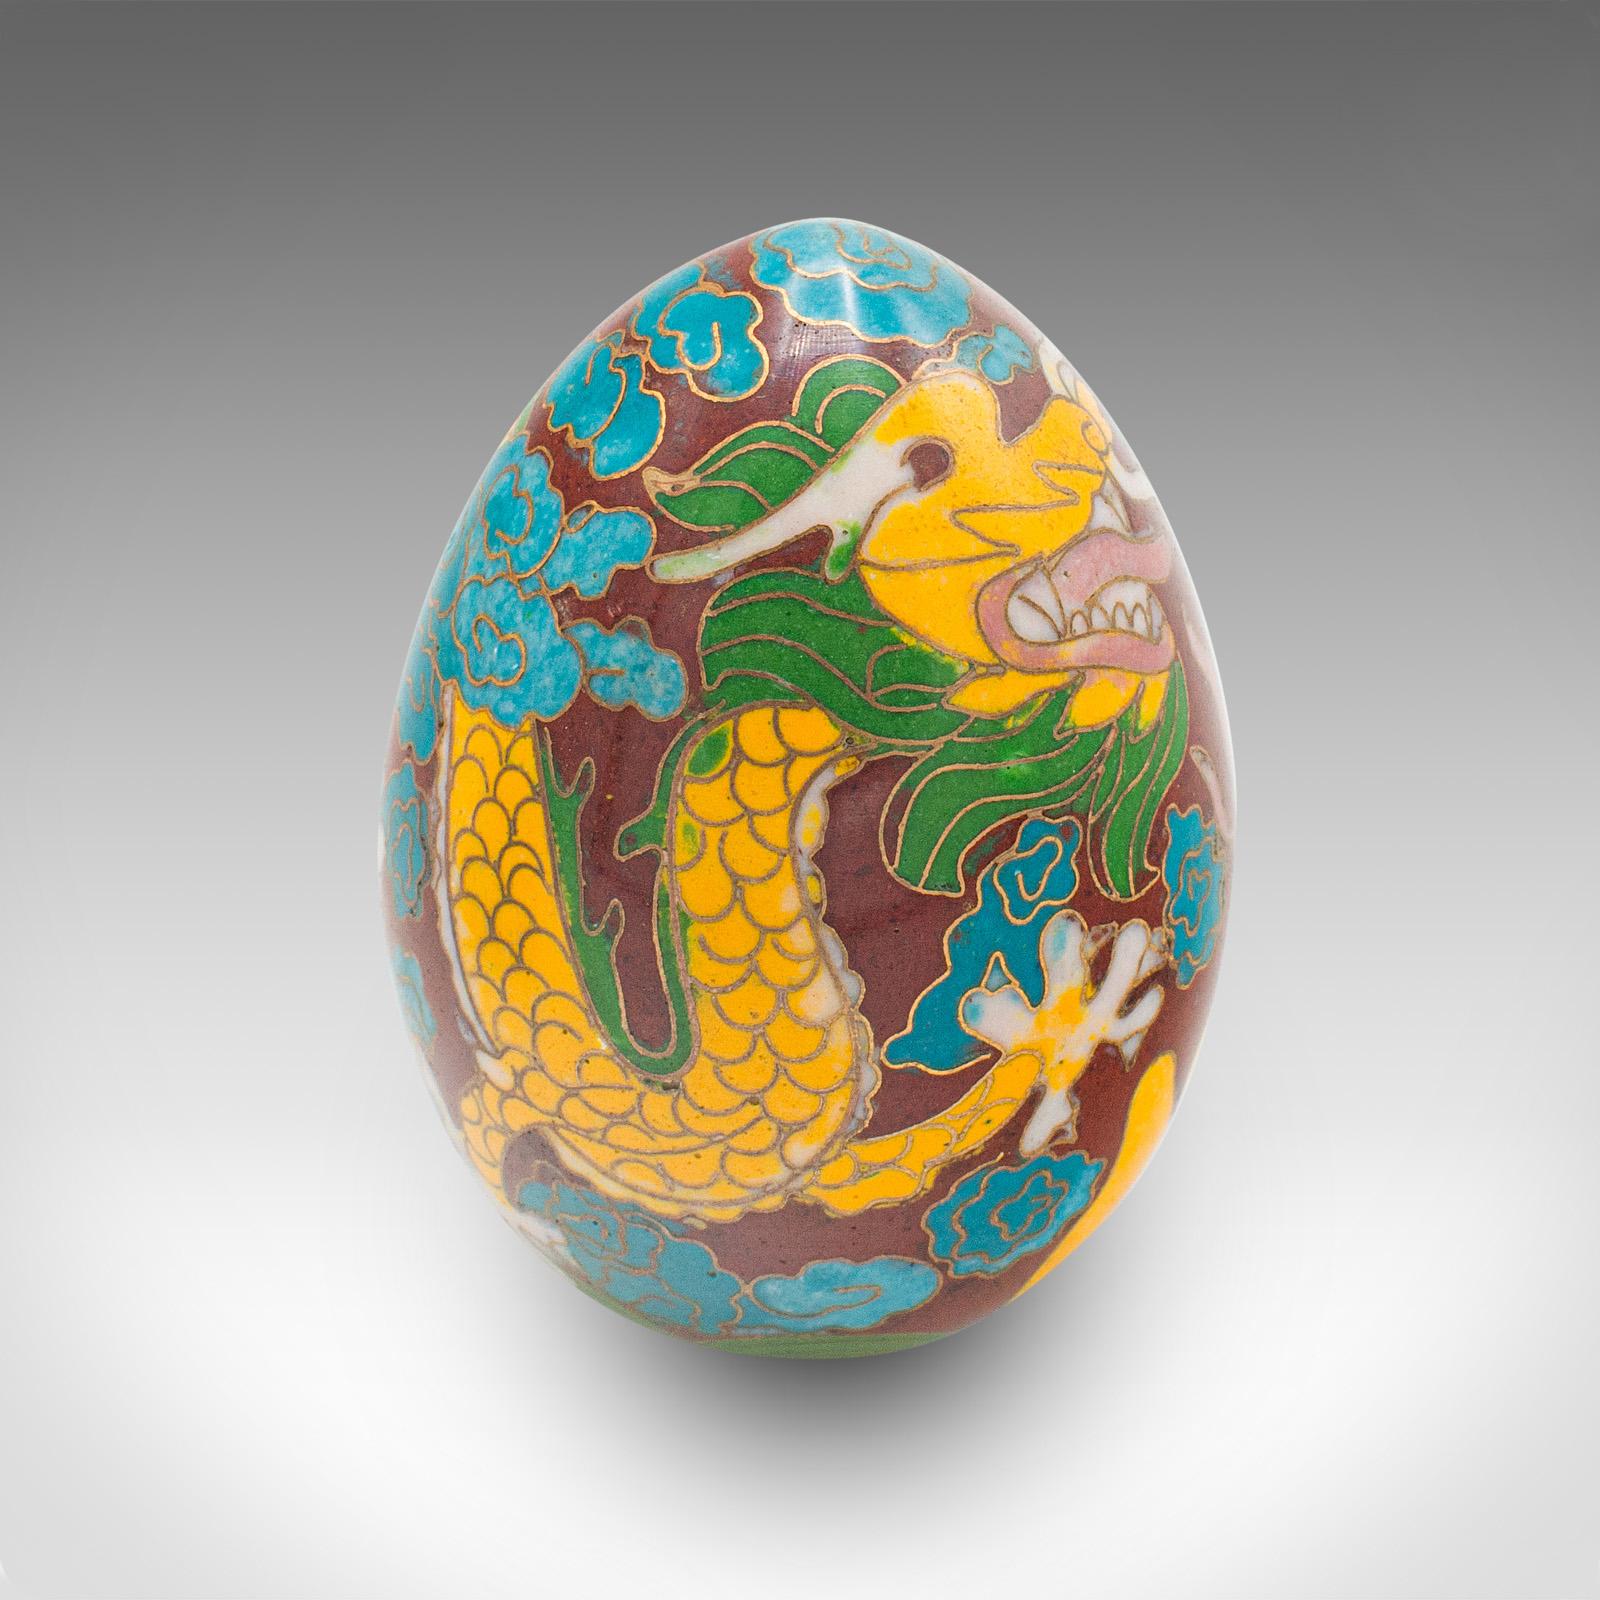 Small Vintage Cloisonne Decorative Egg, Chinese, Enamelled, Ornament, circa 1970 For Sale 2